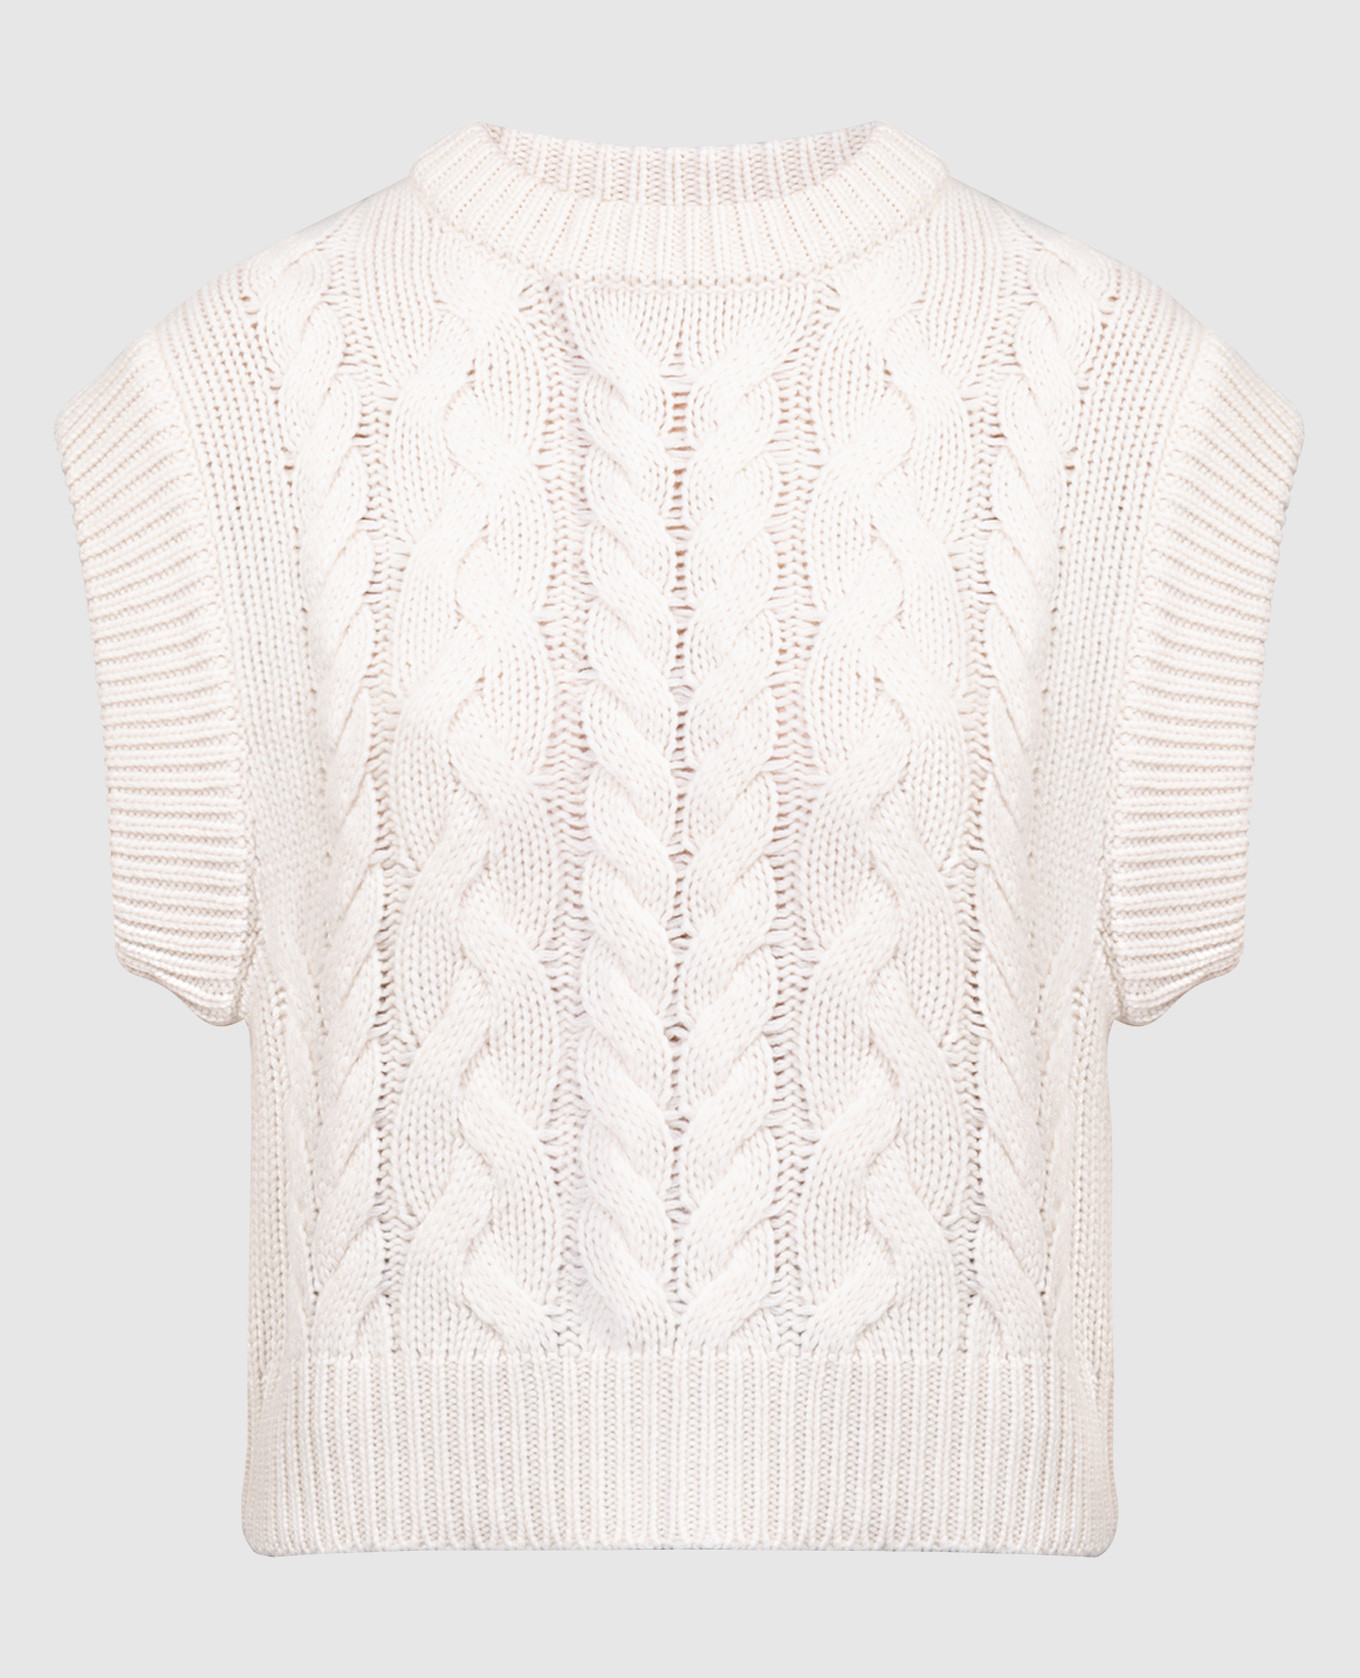 White vest made of cashmere in a textured pattern